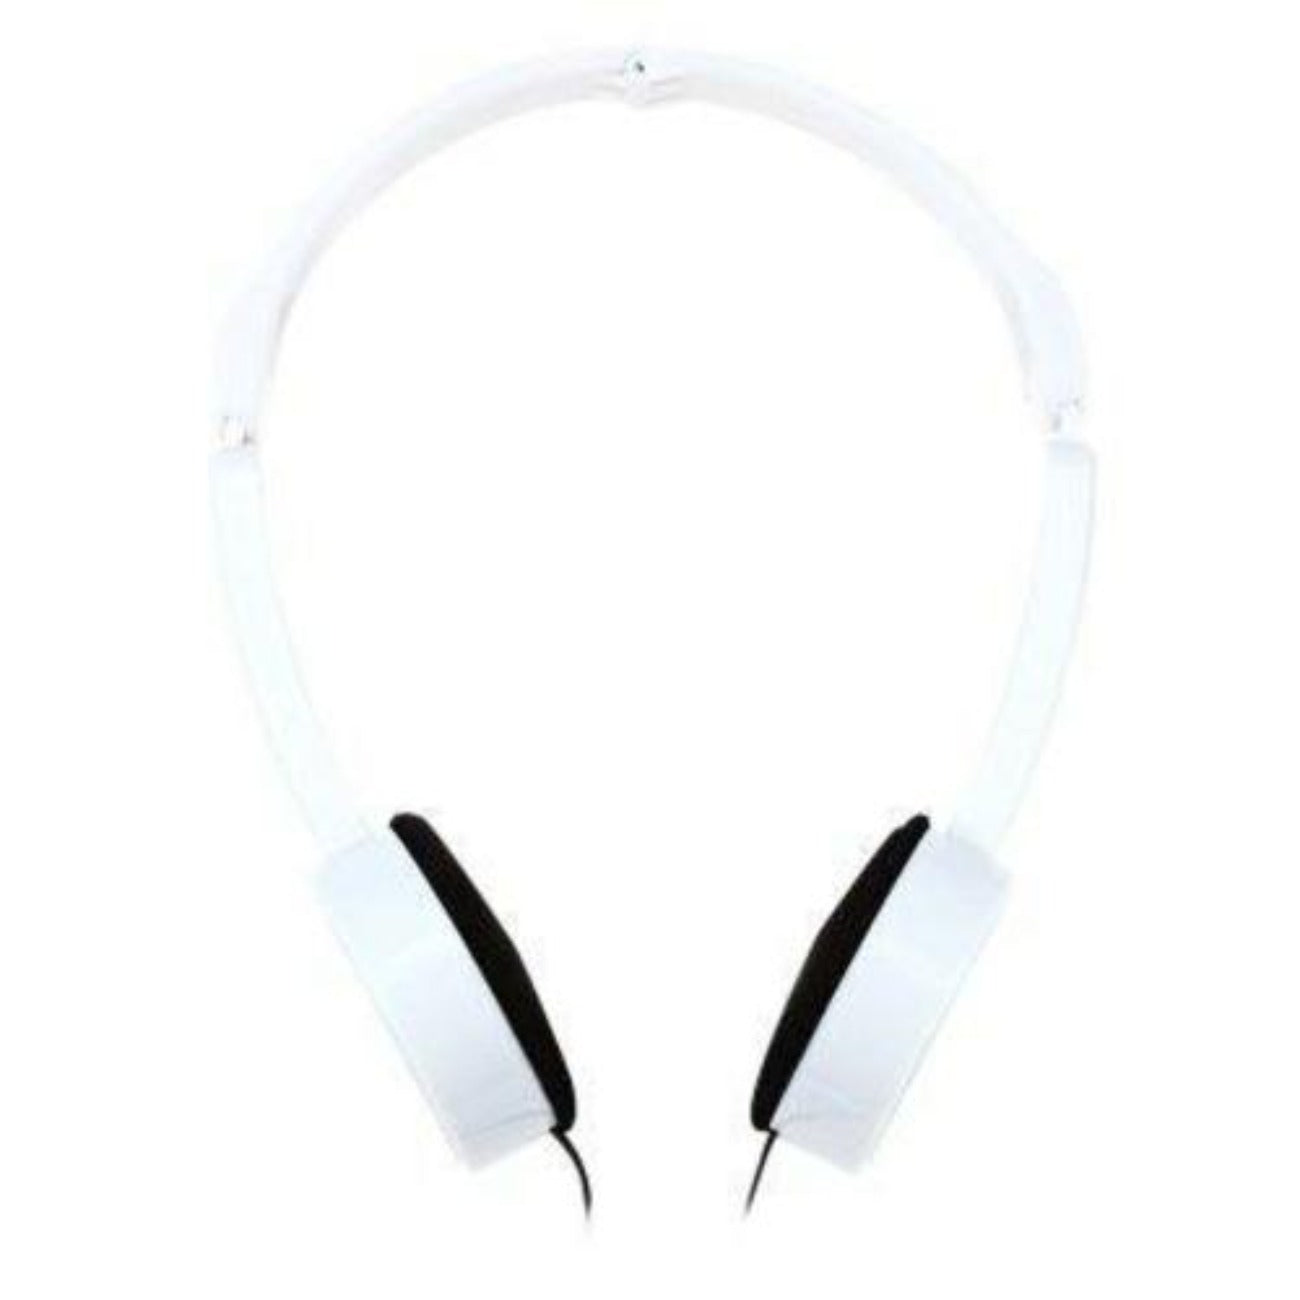 Retractable Foldable Over-ear Headphone With Mic Stereo Bass